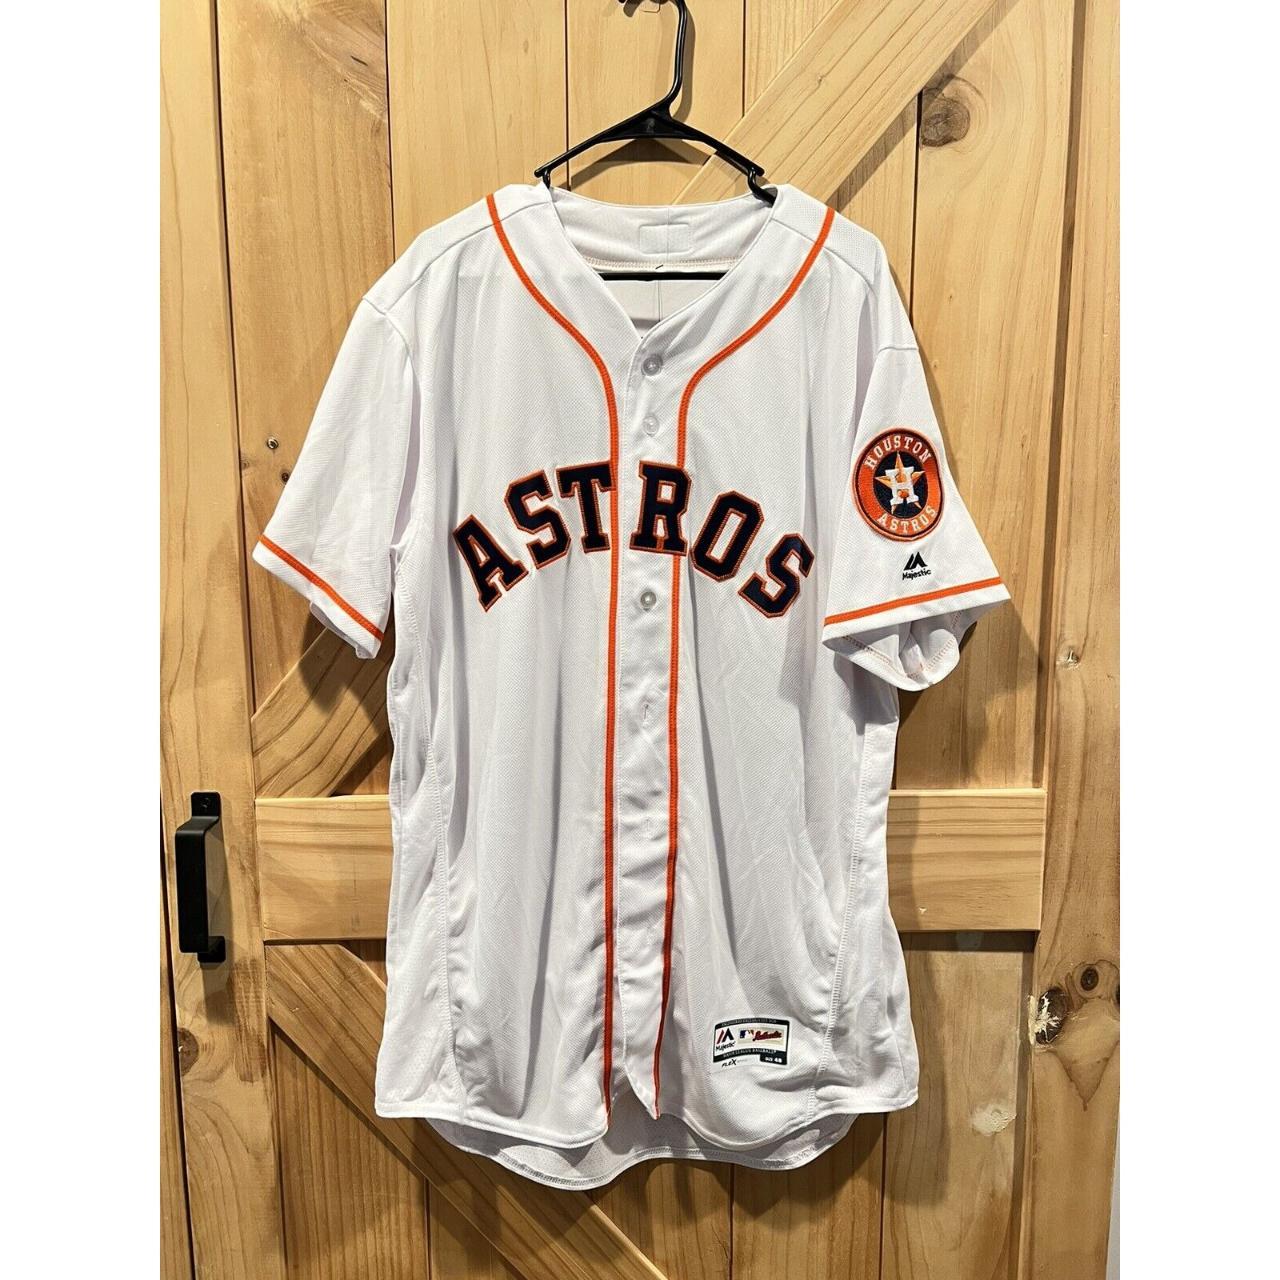 Houston Astros Majestic Official Cool Base Jersey - White